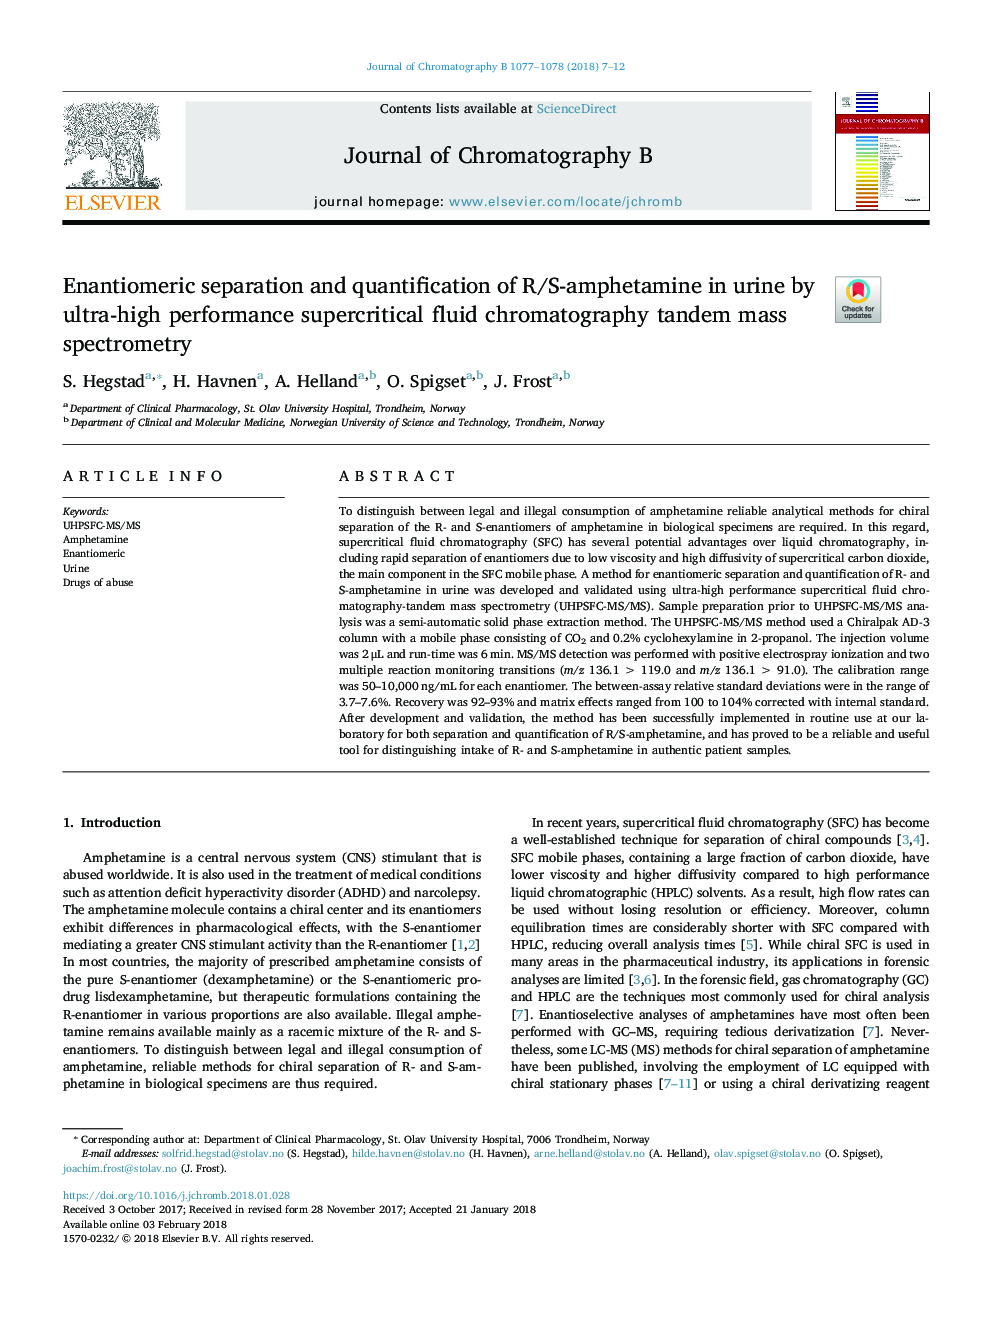 Enantiomeric separation and quantification of R/S-amphetamine in urine by ultra-high performance supercritical fluid chromatography tandem mass spectrometry